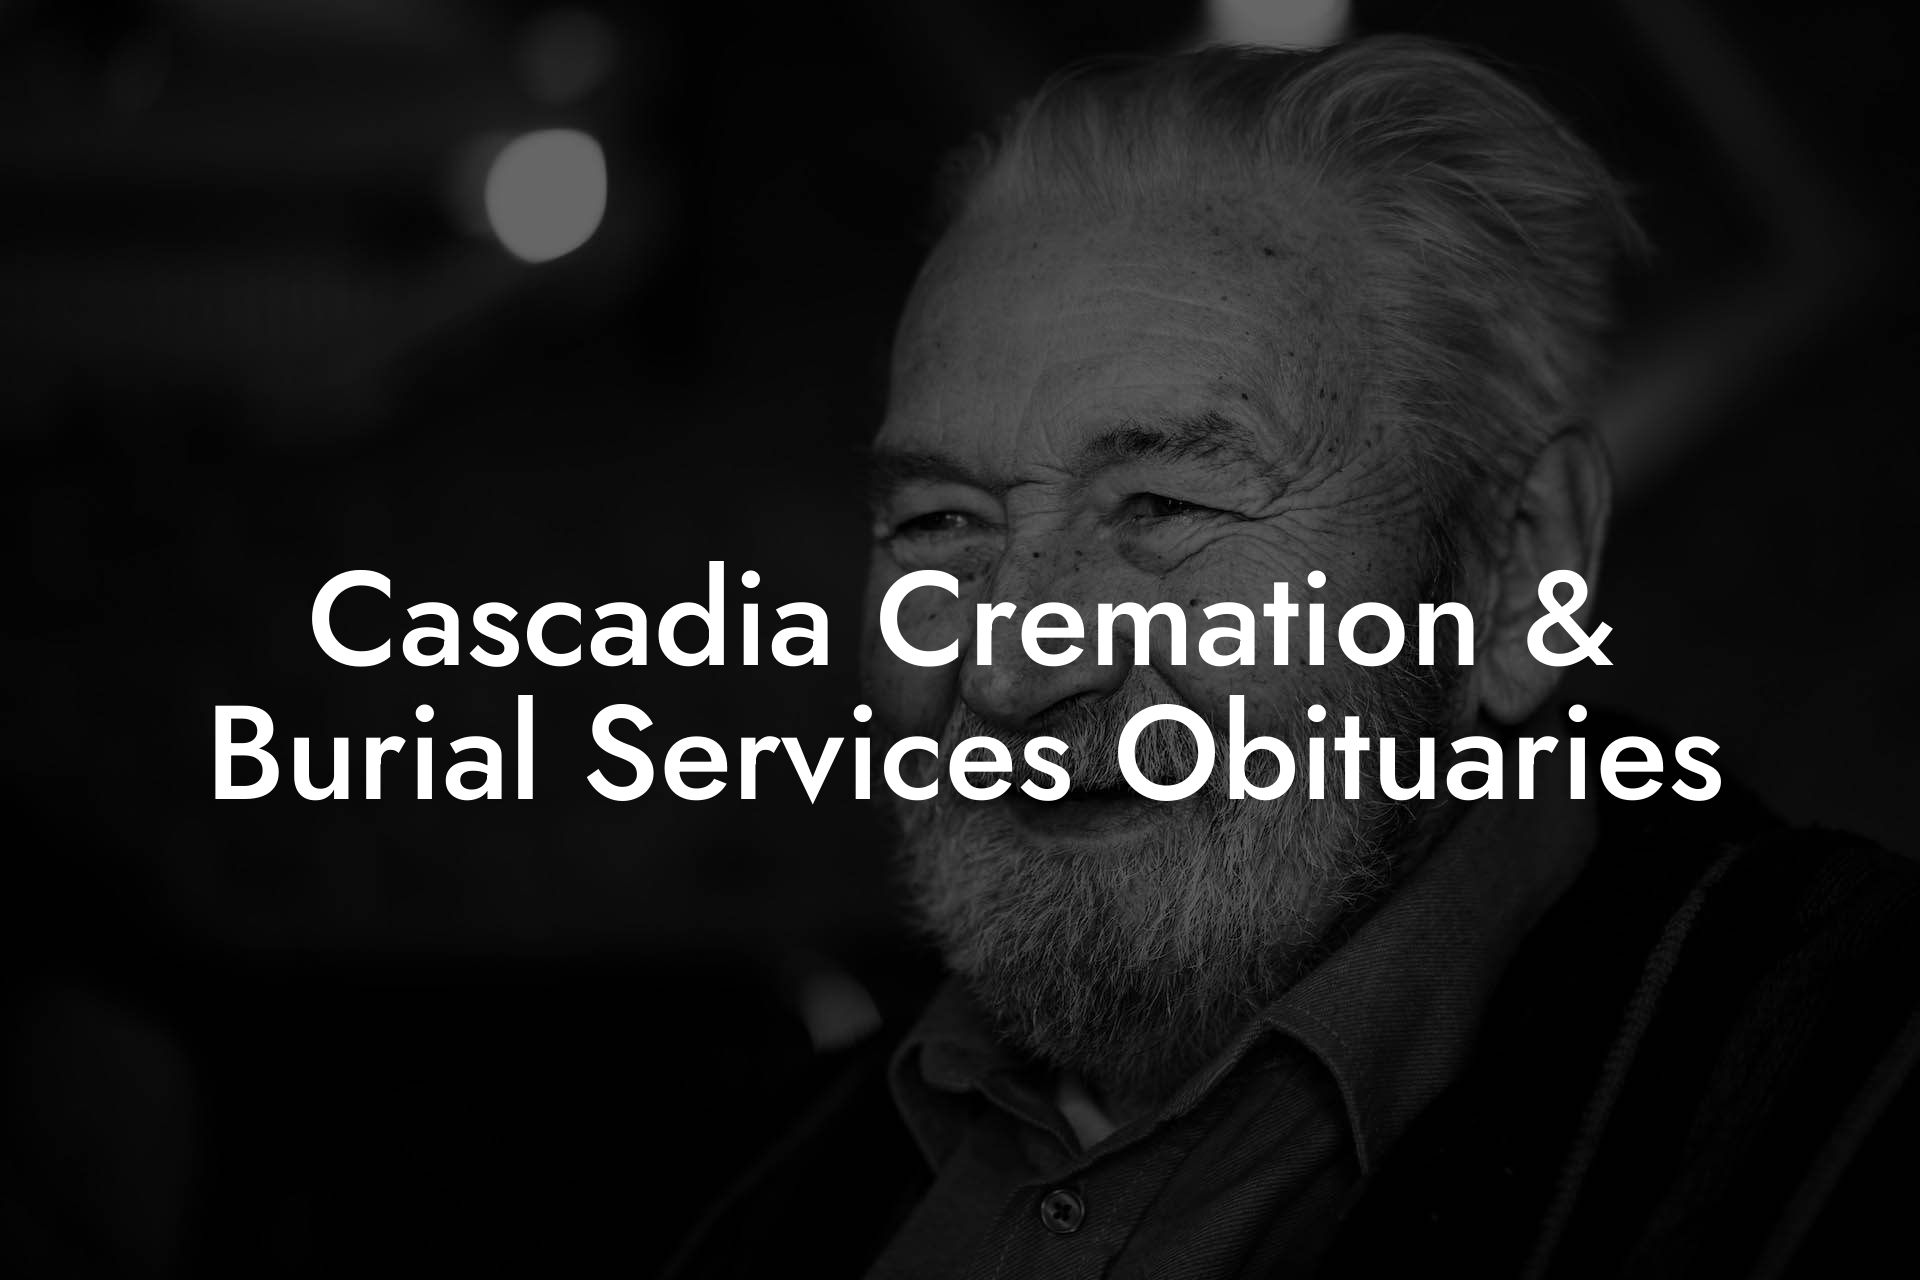 Cascadia Cremation & Burial Services Obituaries